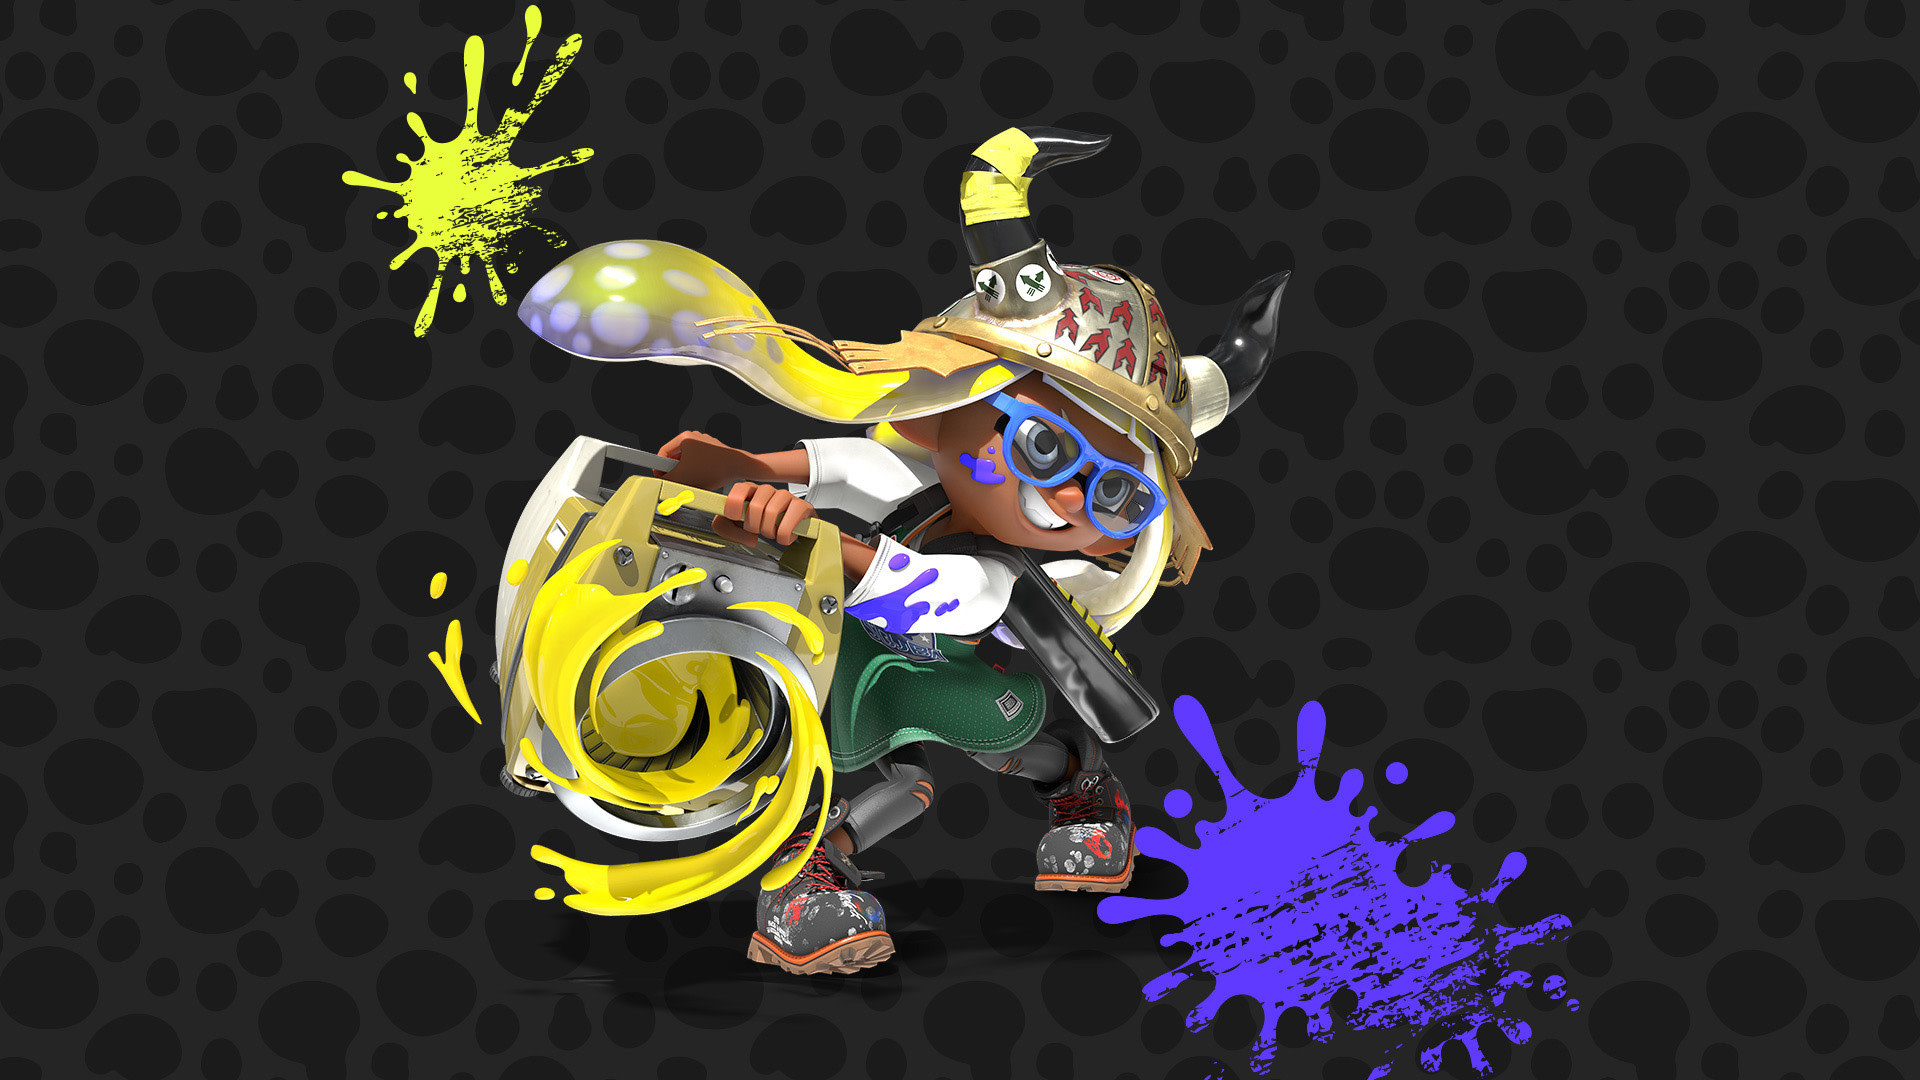 Catch up on what Splatoon 3 has to offer Get messy